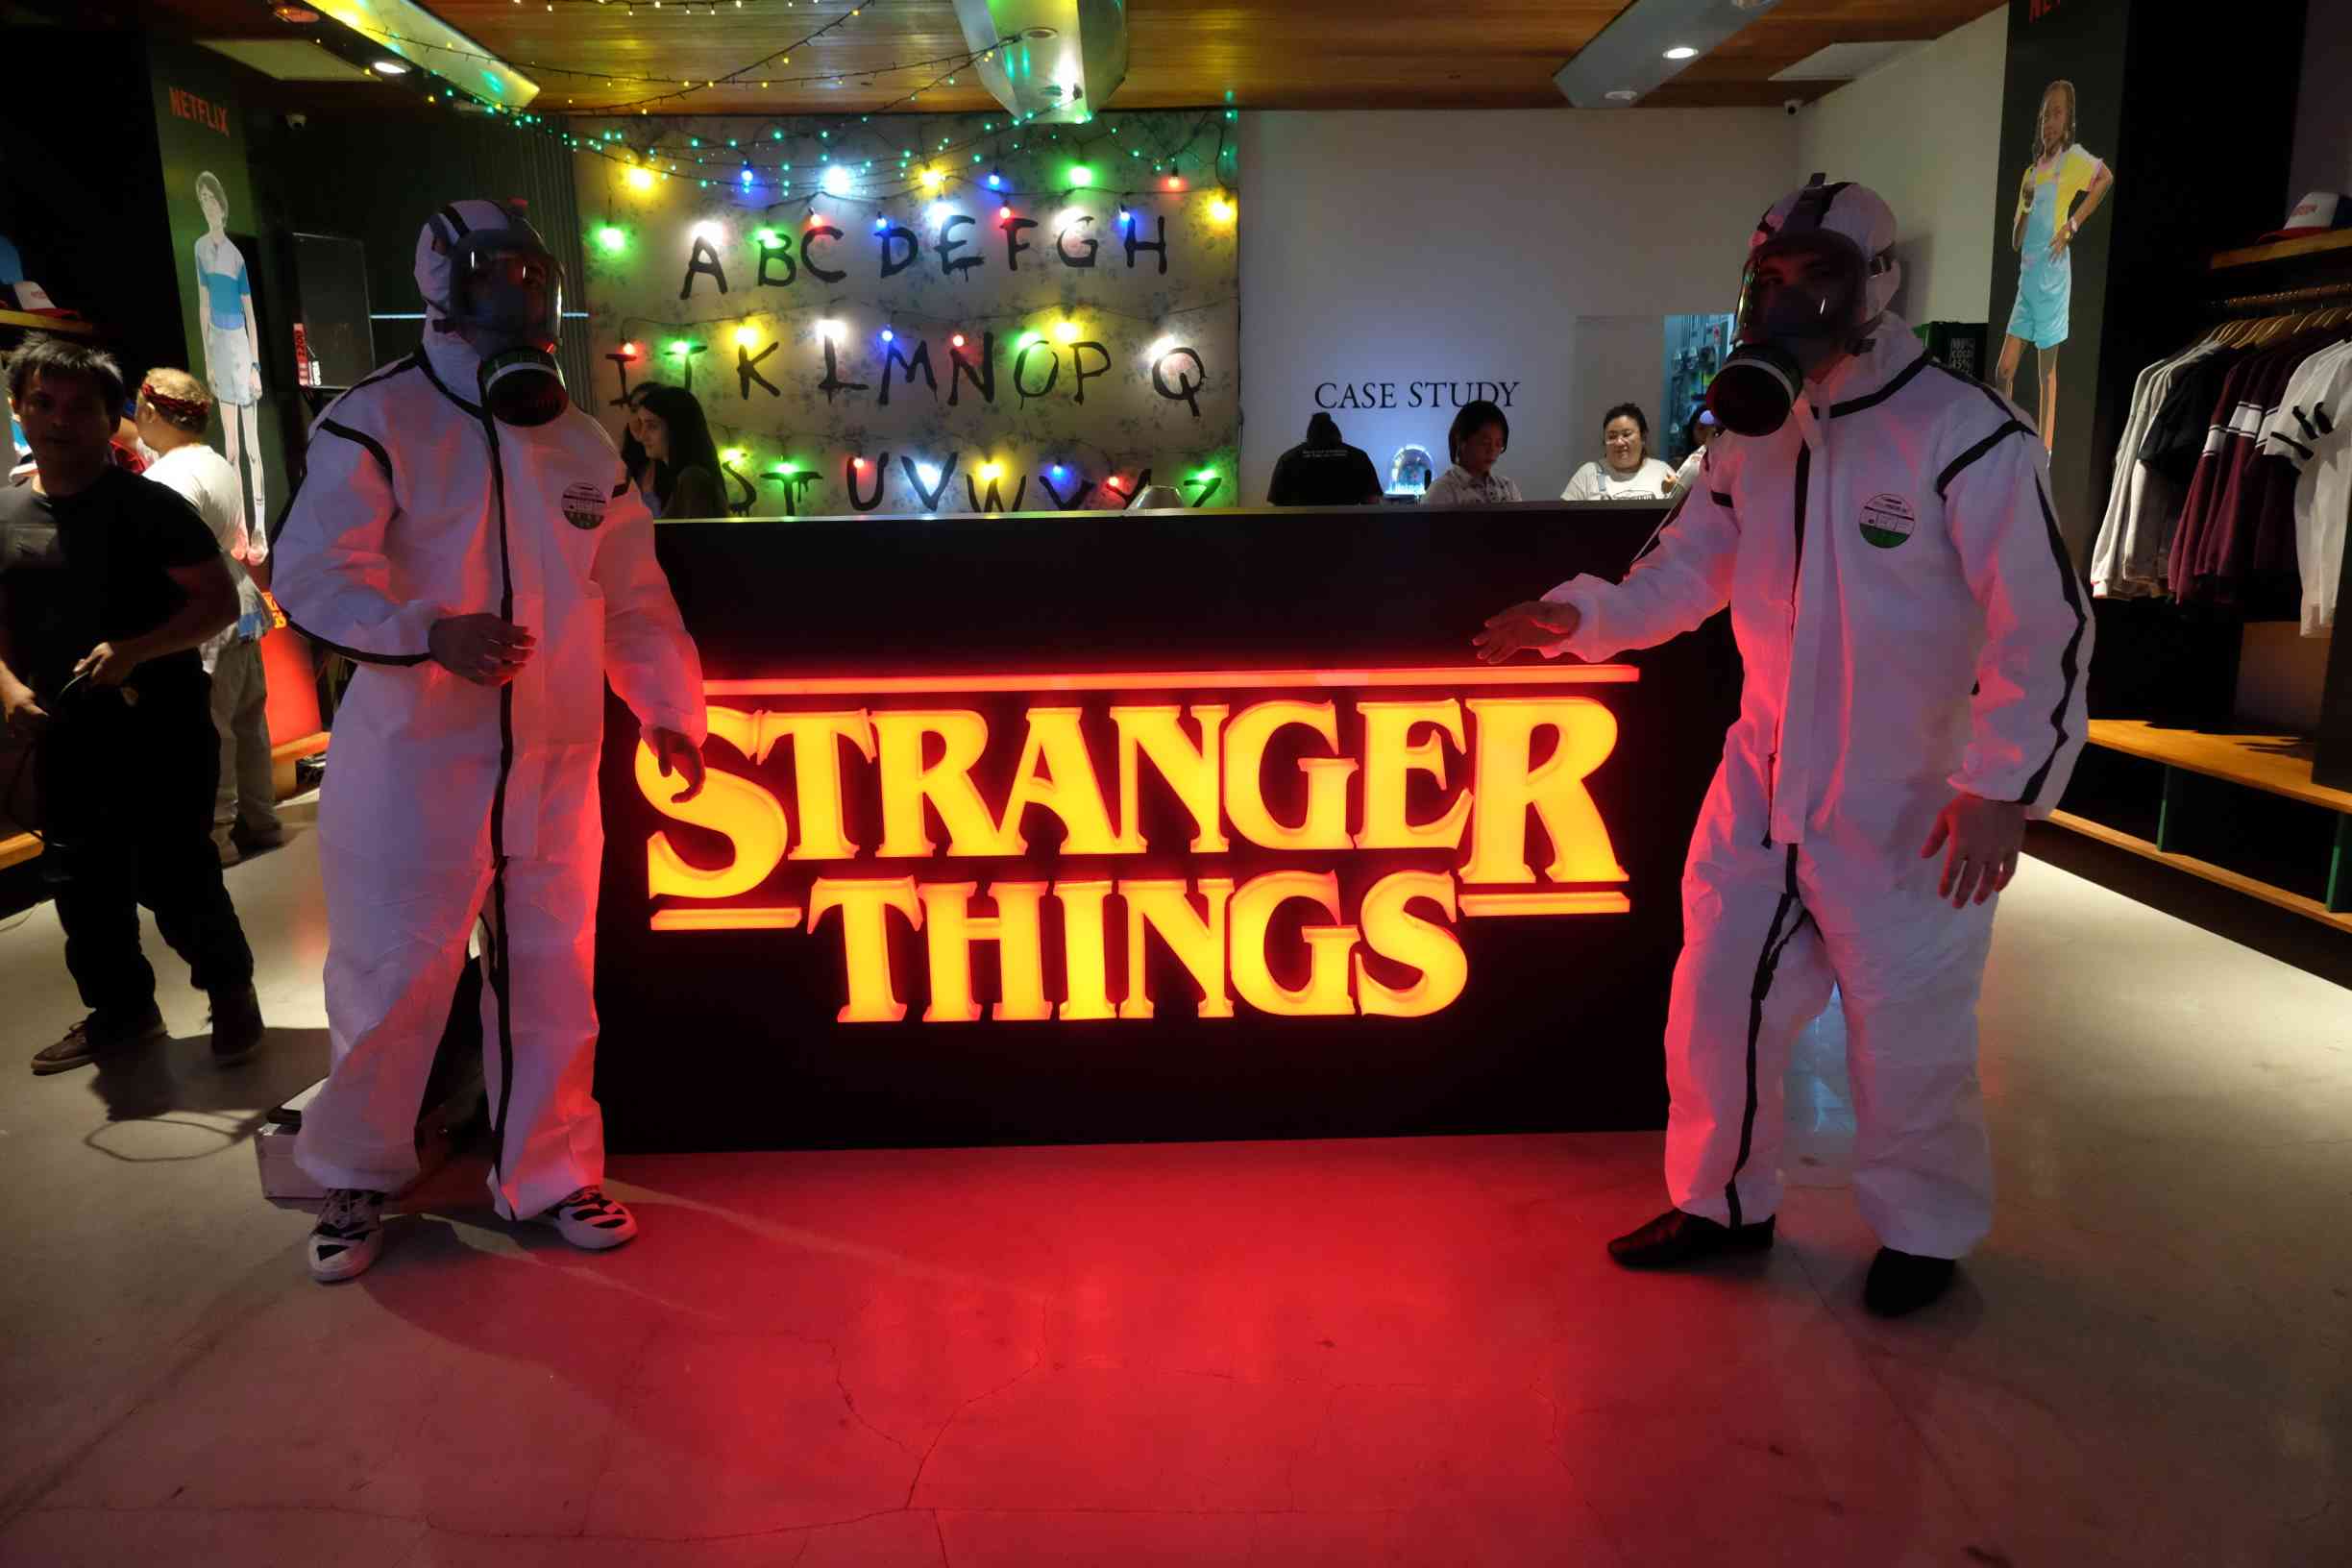 Stranger things netflix vr experience not in us - monoQas